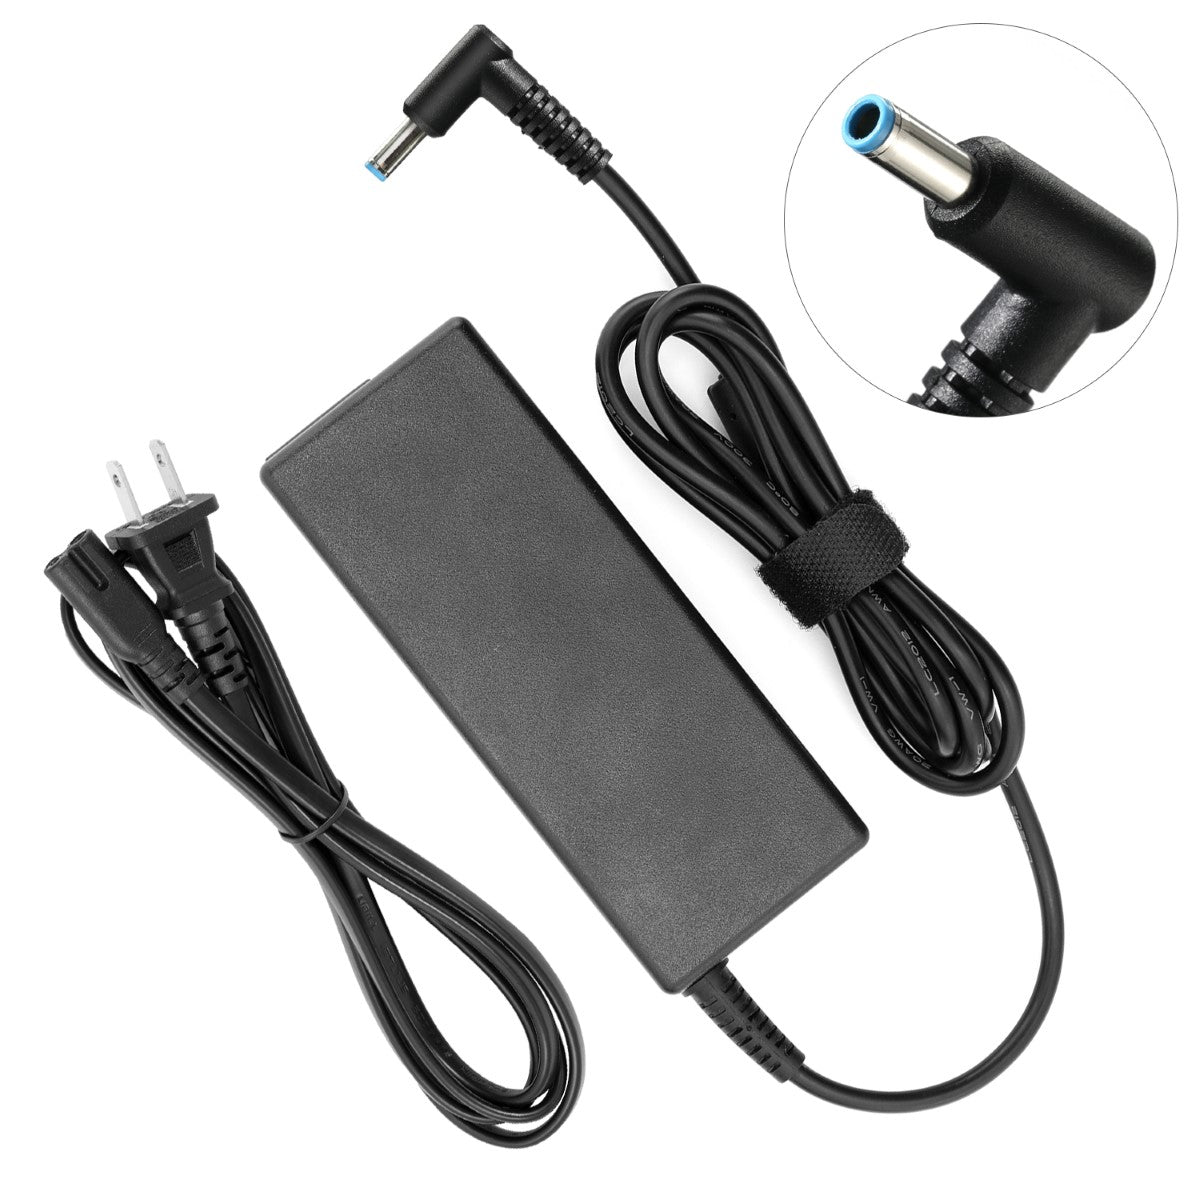 AC Adapter Charger for HP Pavilion 14-ab166us Laptop.